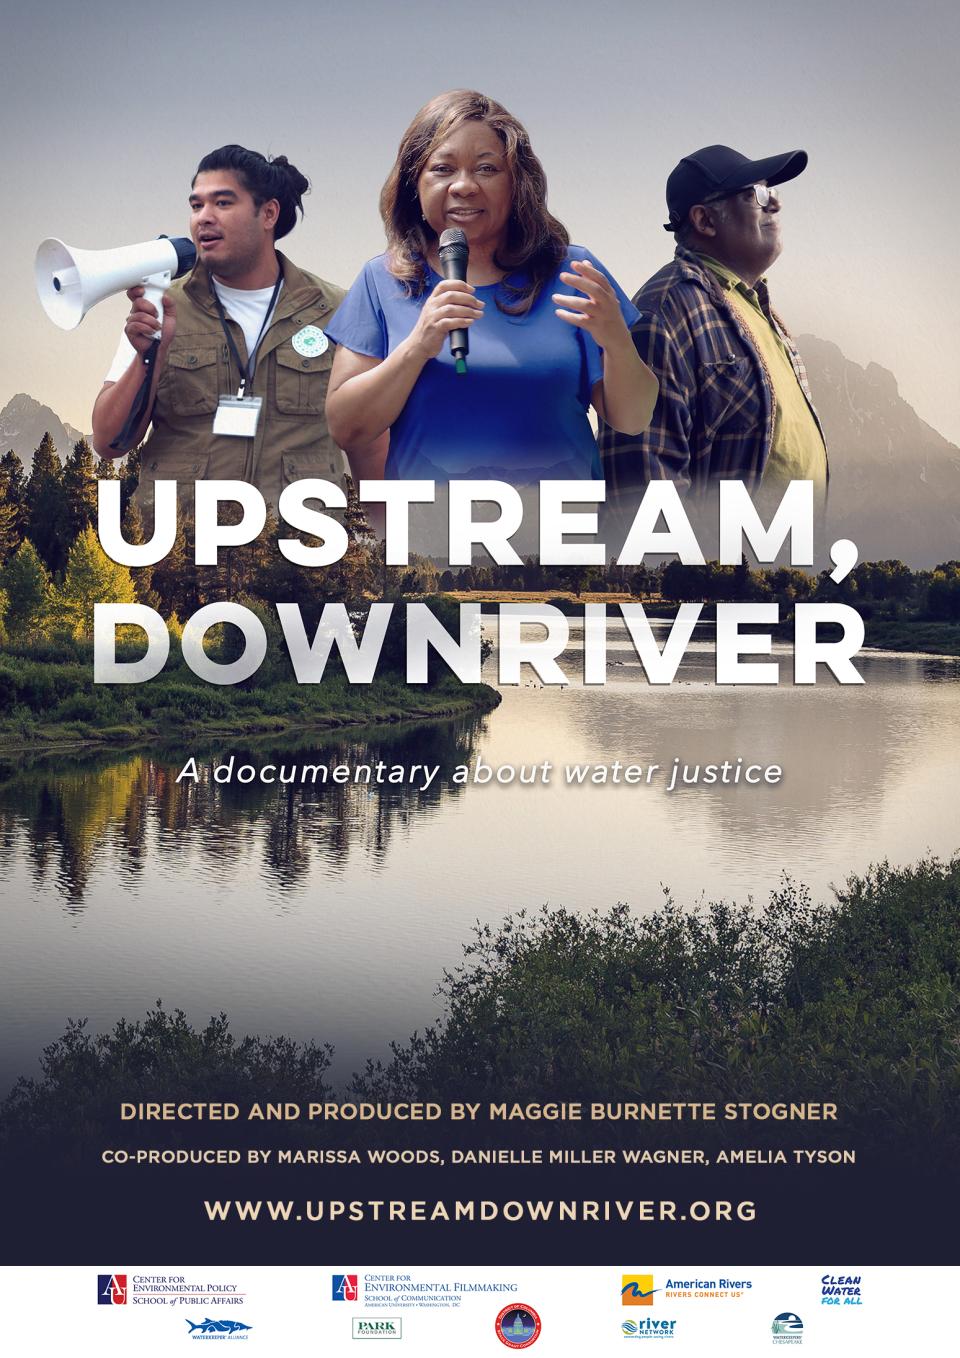 Three figures, a powerful strong woman flanked by two men, float above the film title (Upstream, Downriver) set above a shimmering river.